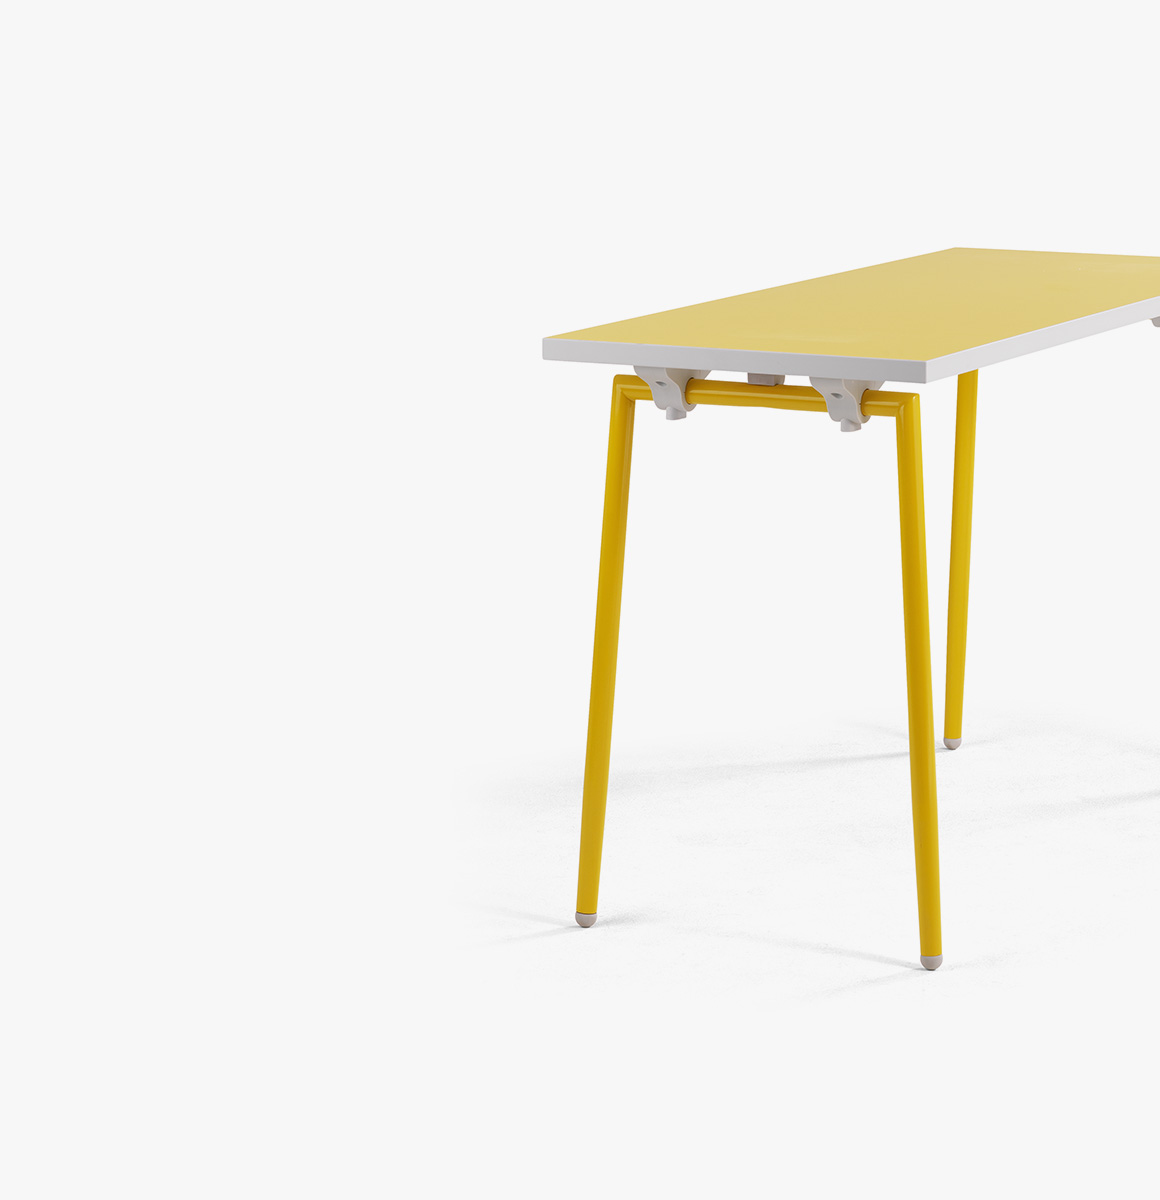 Quickly folding table